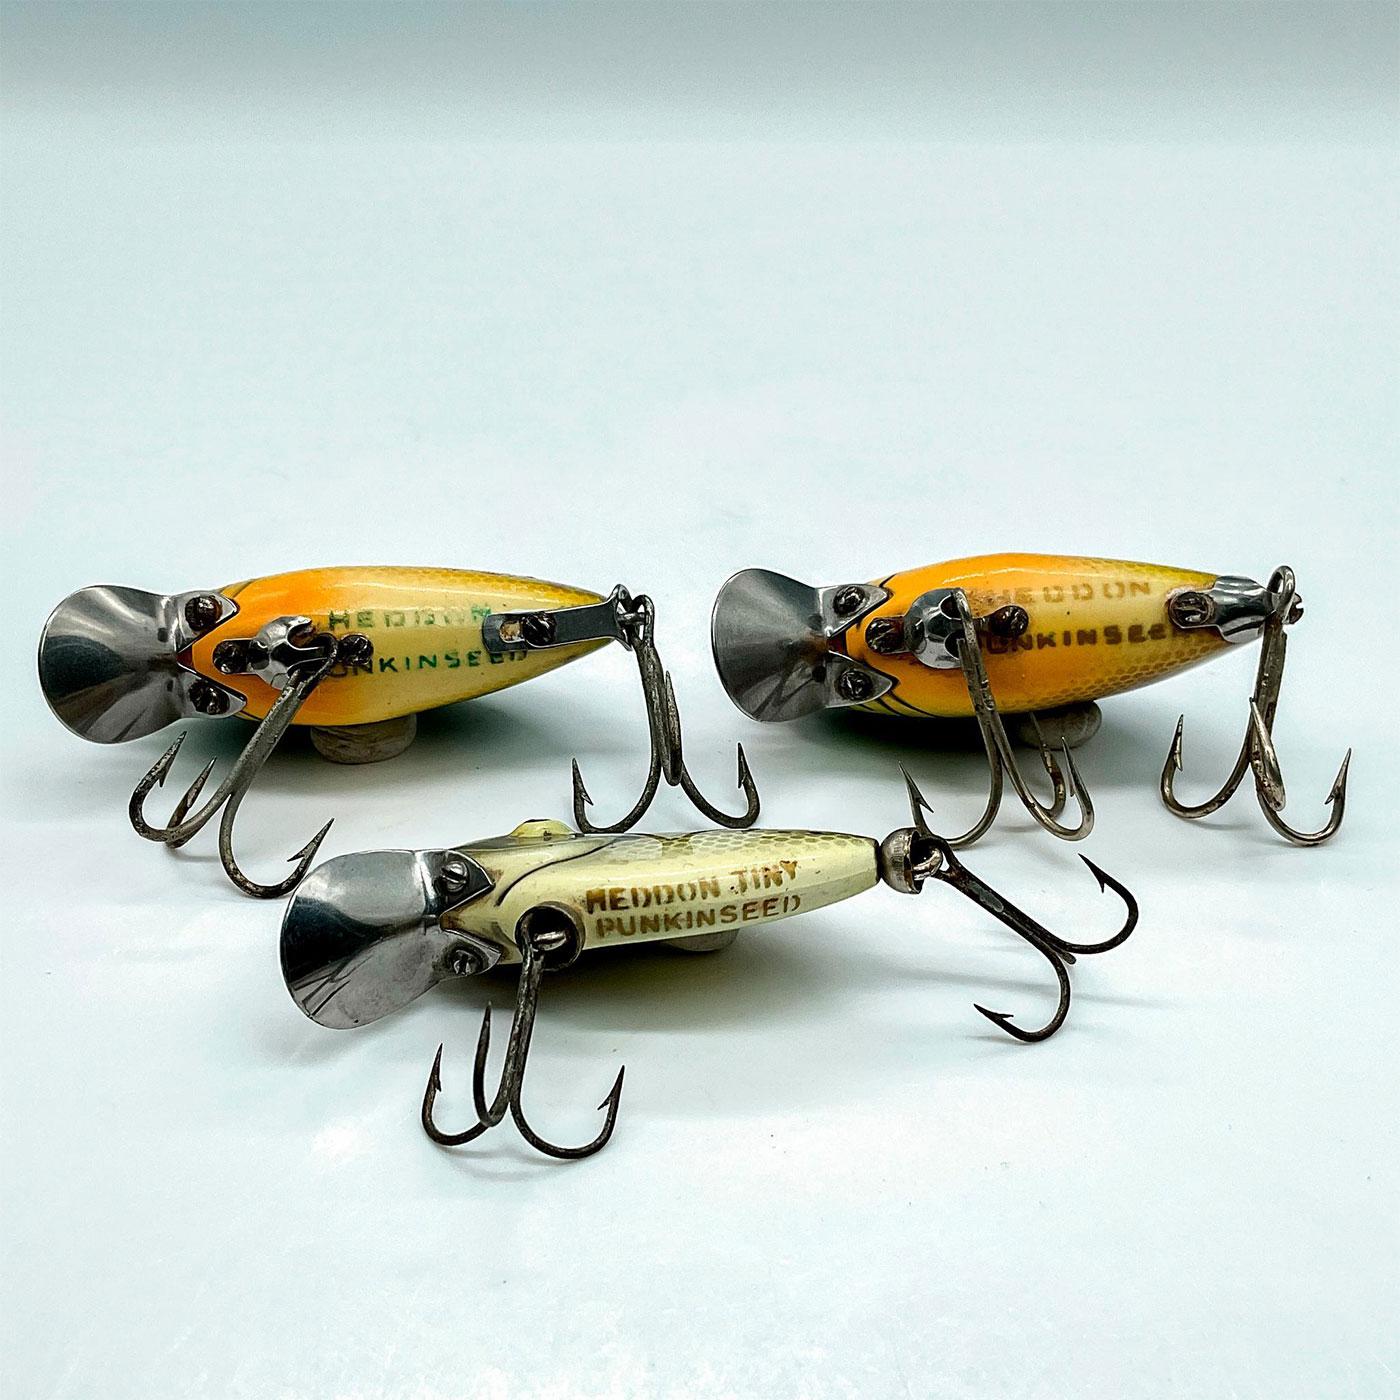 3pc Vintage Heddon Punkinseed Lures Sunfish and Crappie